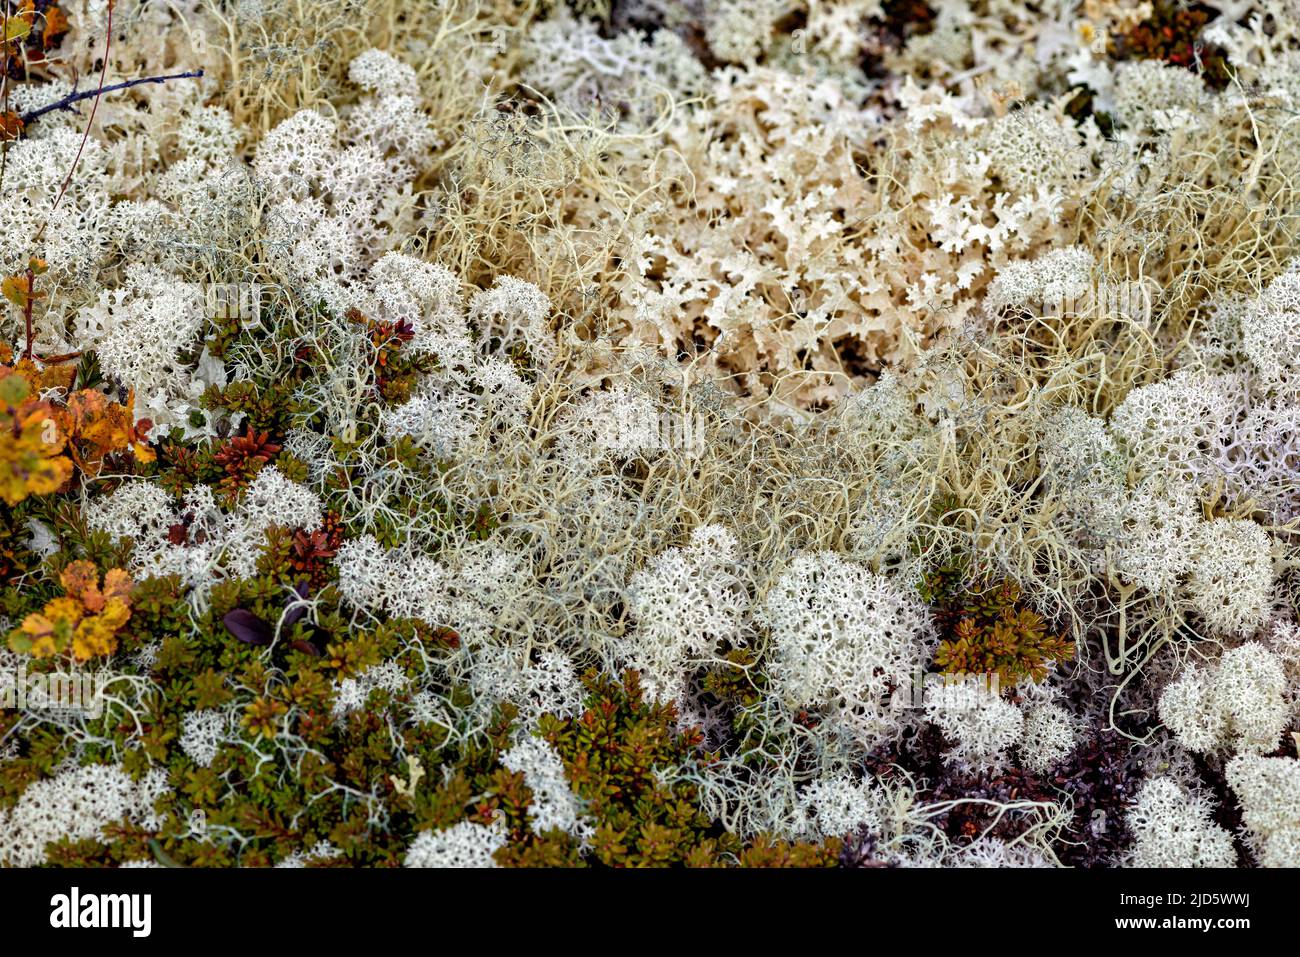 Star-tipped cup lichen (Cladonia stellaris), Witch's-hair Lichen (Alectoria ochroleuca) and Crinkled snow lichen (Flavocetraria nivalis) growing toget Stock Photo